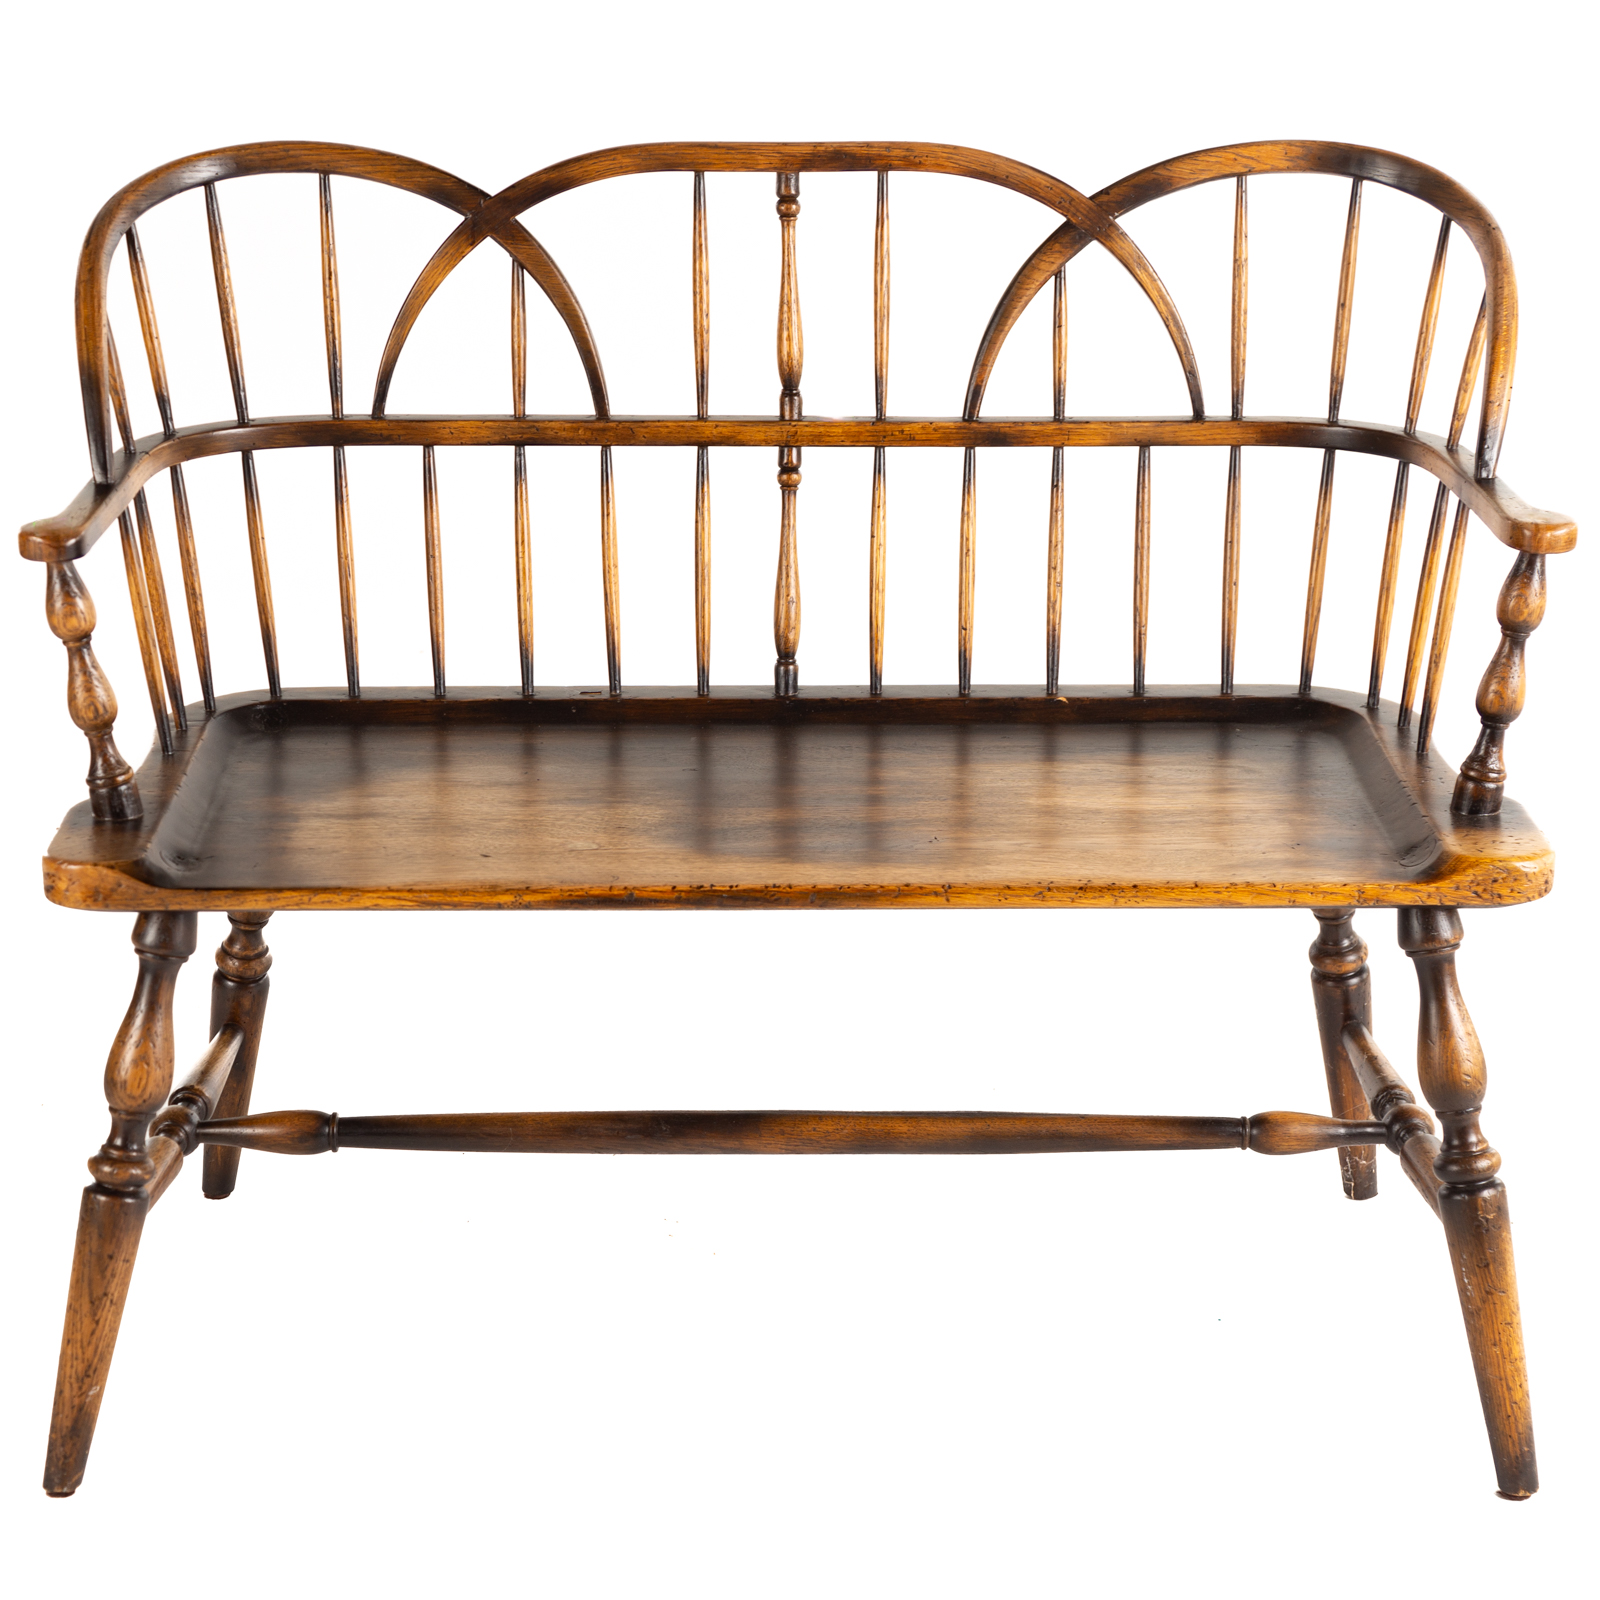 WINDSOR STYLE BENCH BY EUROPEAN 2eae97